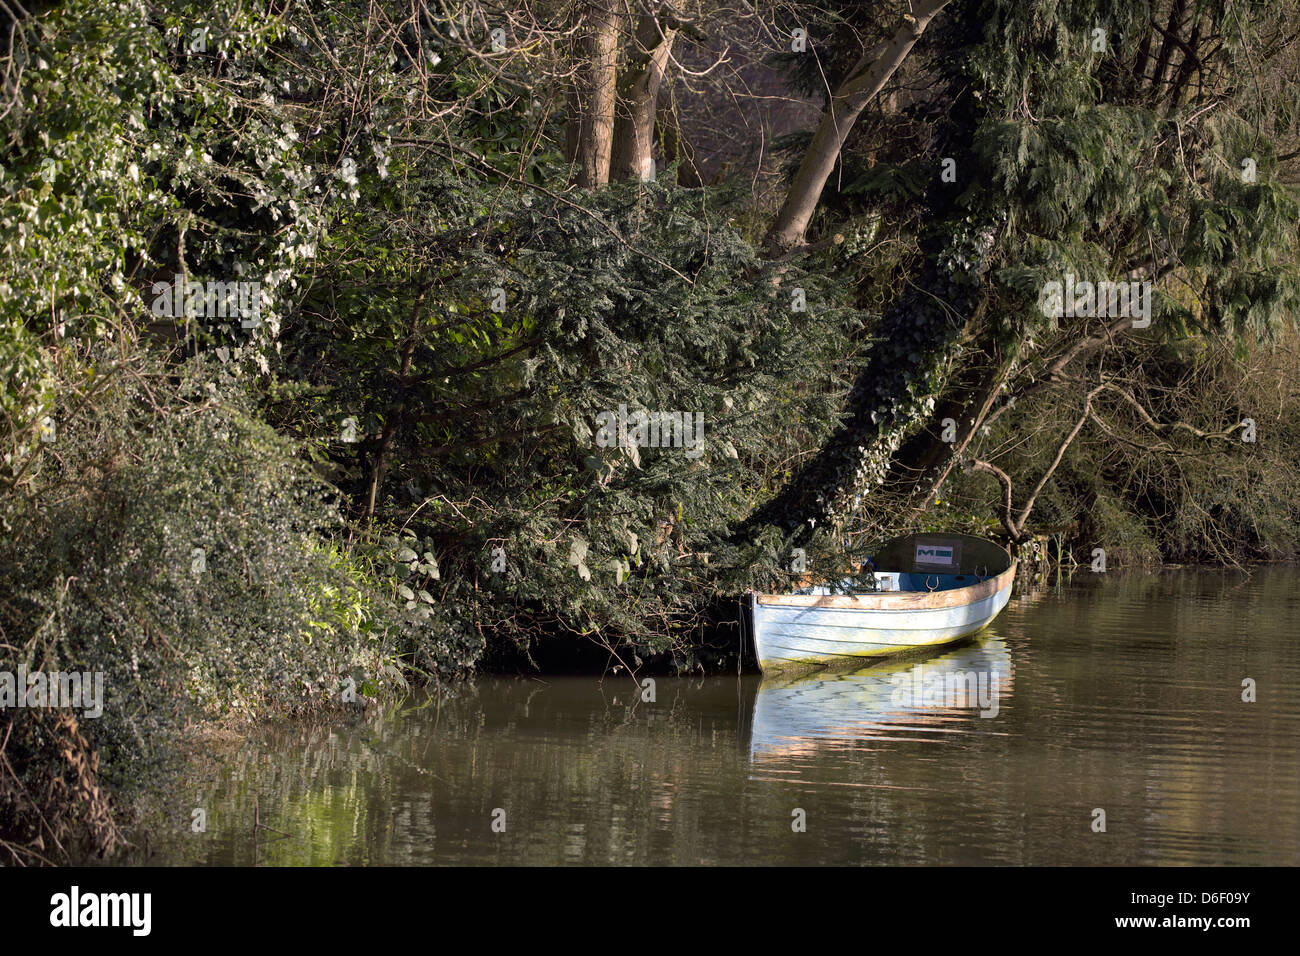 Wooden rowing boat South Oxford Canal Oxford Oxfordshire Oxon England UK GB boat row row boat canal canals scene low-key trees Stock Photo